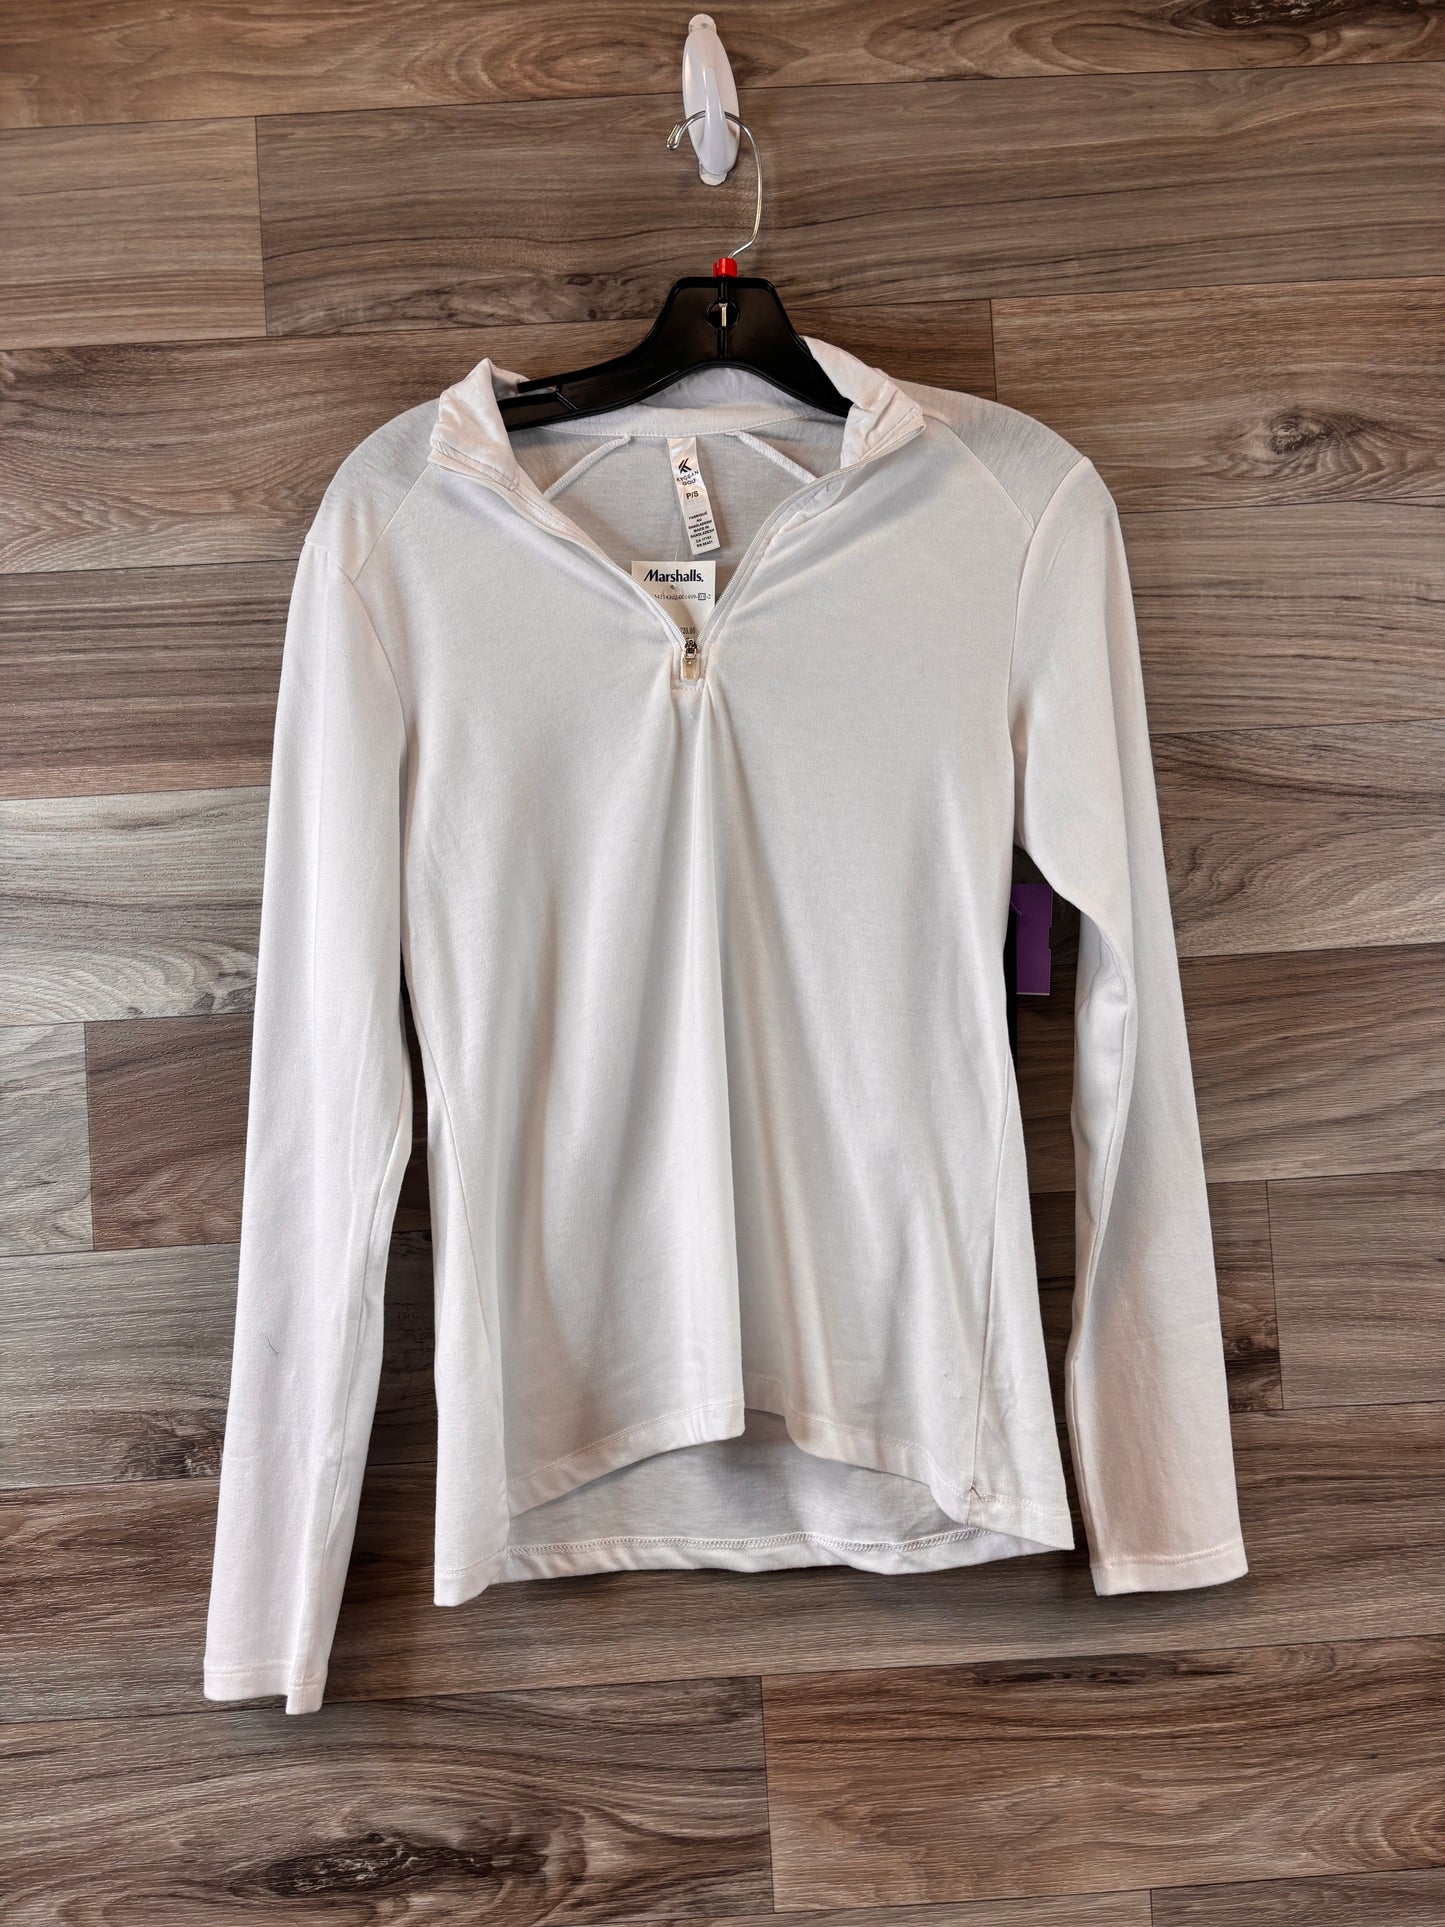 White Athletic Top Long Sleeve Collar Kyodan, Size Petite   S